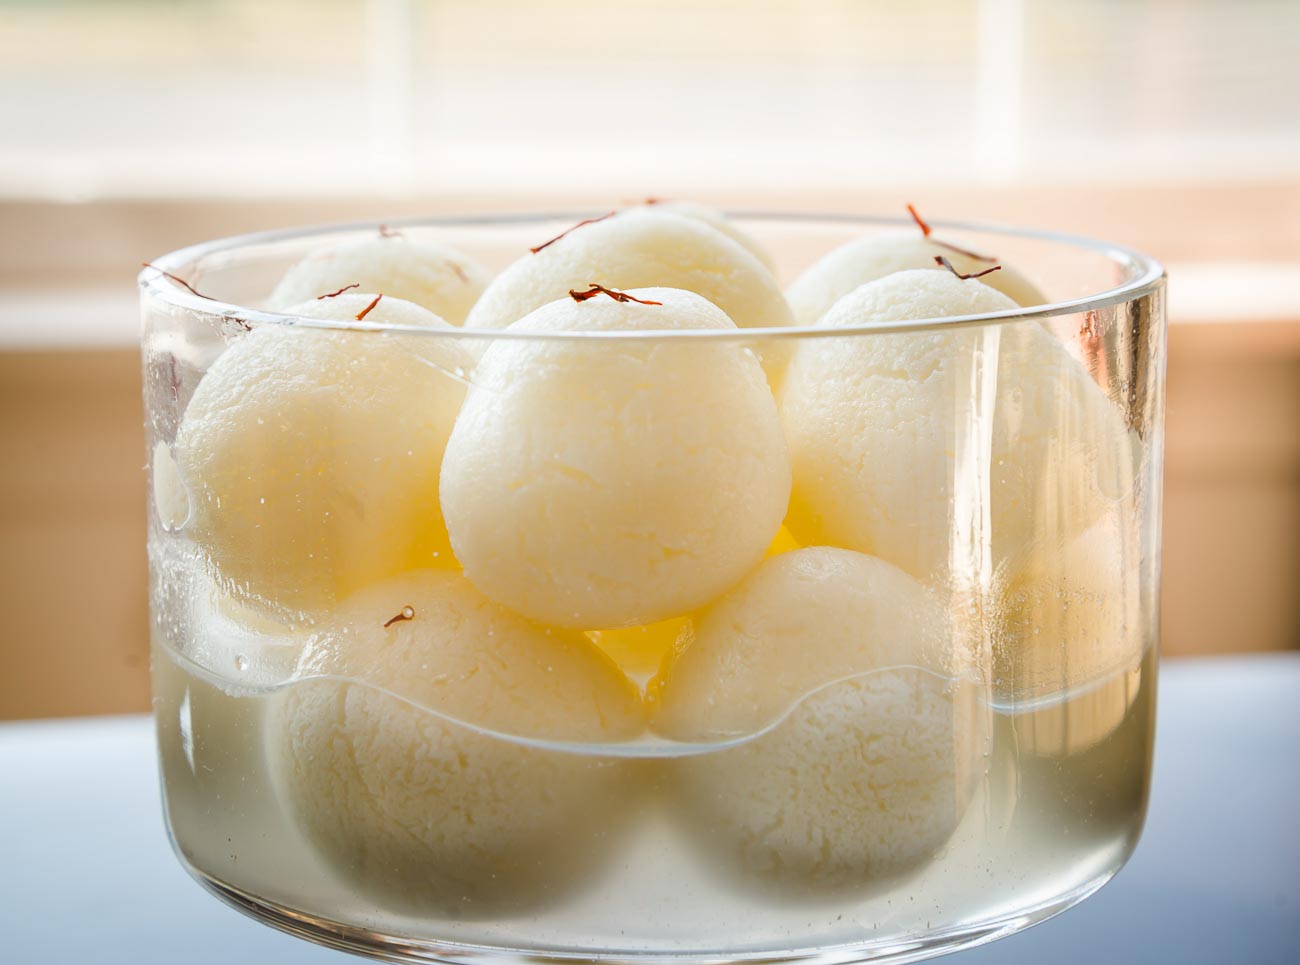 Traditional Bengali Rasgulla Recipe - Cottage Cheese Balls In Sweetened Syrup